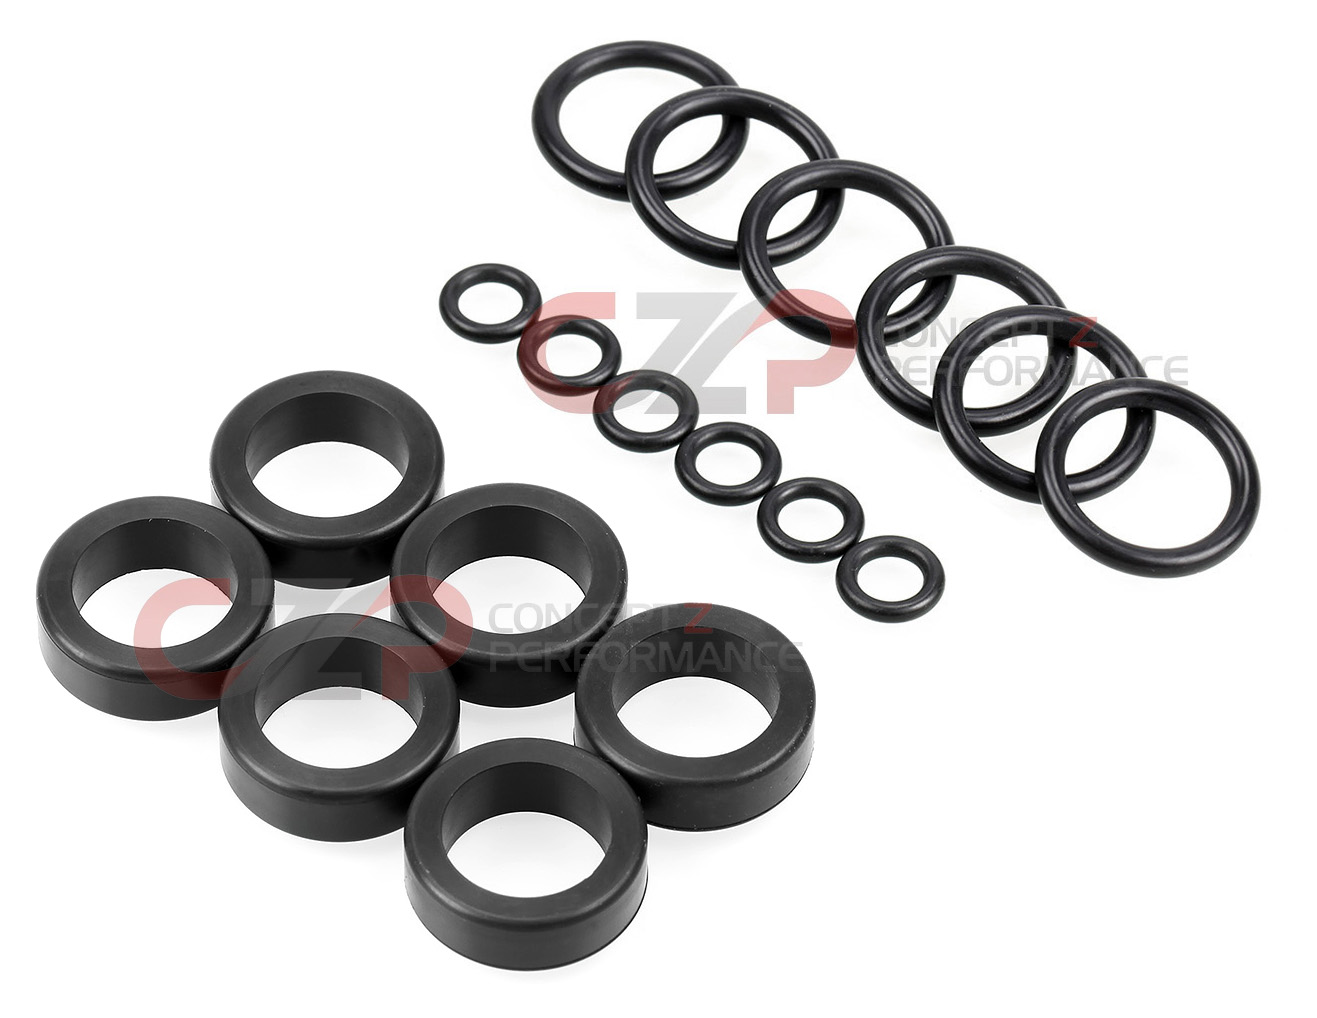 Nissan OEM Fuel Injector O-Ring and Lower Insulator Kit, Later Style - Nissan 300ZX Z32